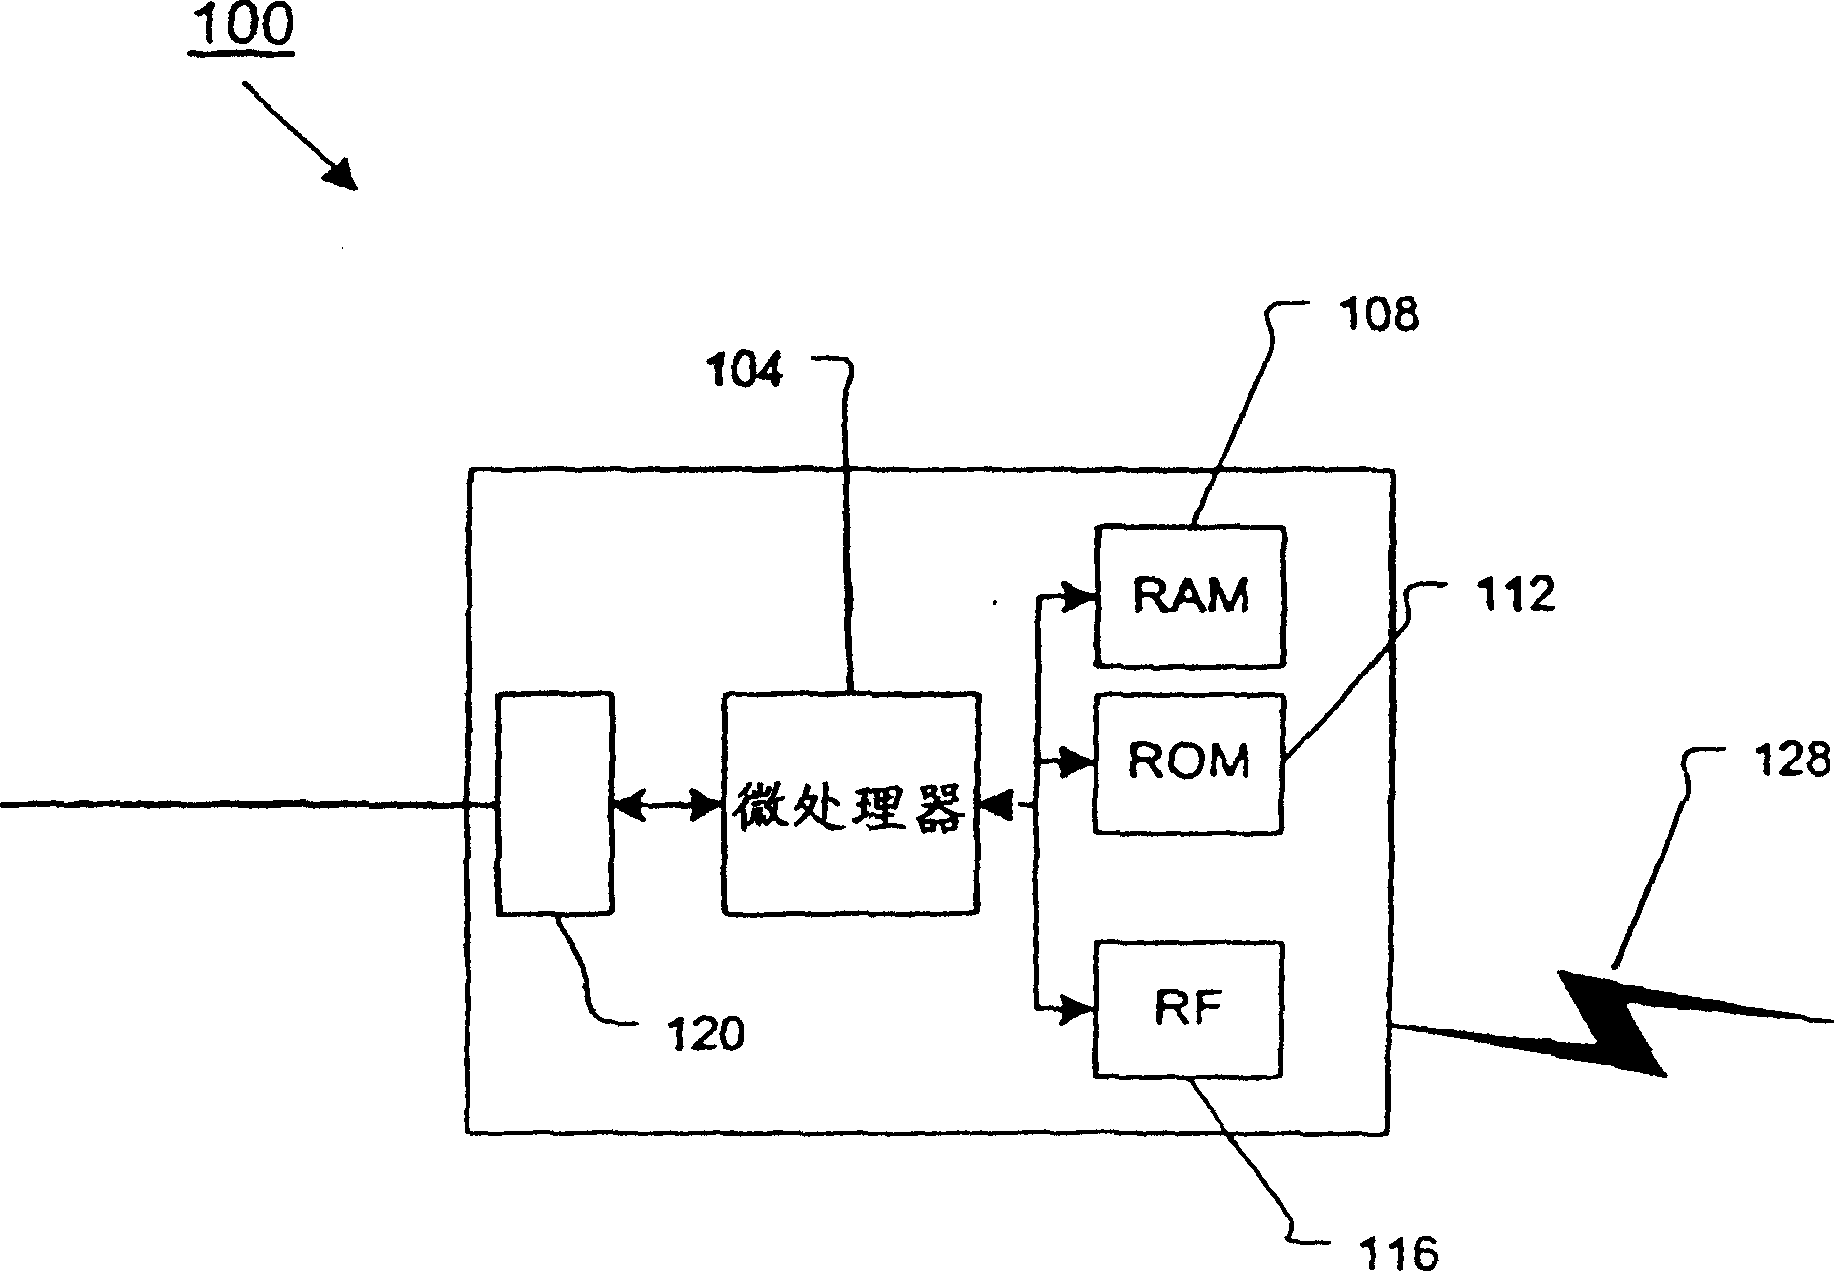 Dual port wireless modem for circuit switched and packet switched data transfer